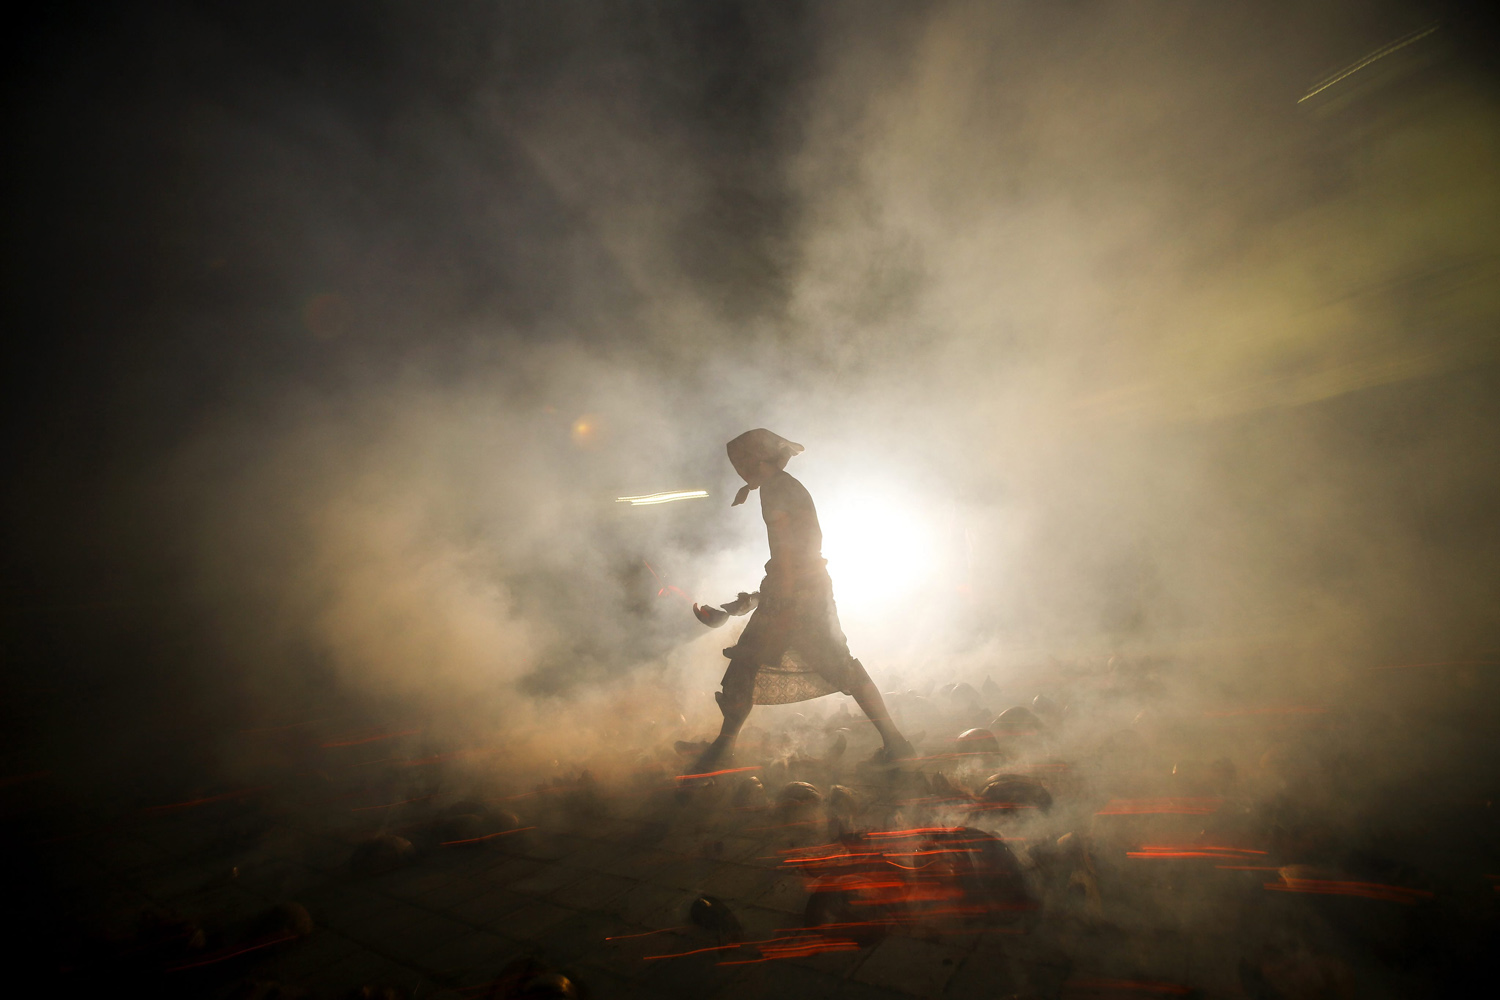 Oct. 19, 2013. A Balinese man walks among the blazing coconut husks during a sacred ritual called 'Mesabatan Api' or fire fight at a temple in Tuban, Bali, Indonesia.